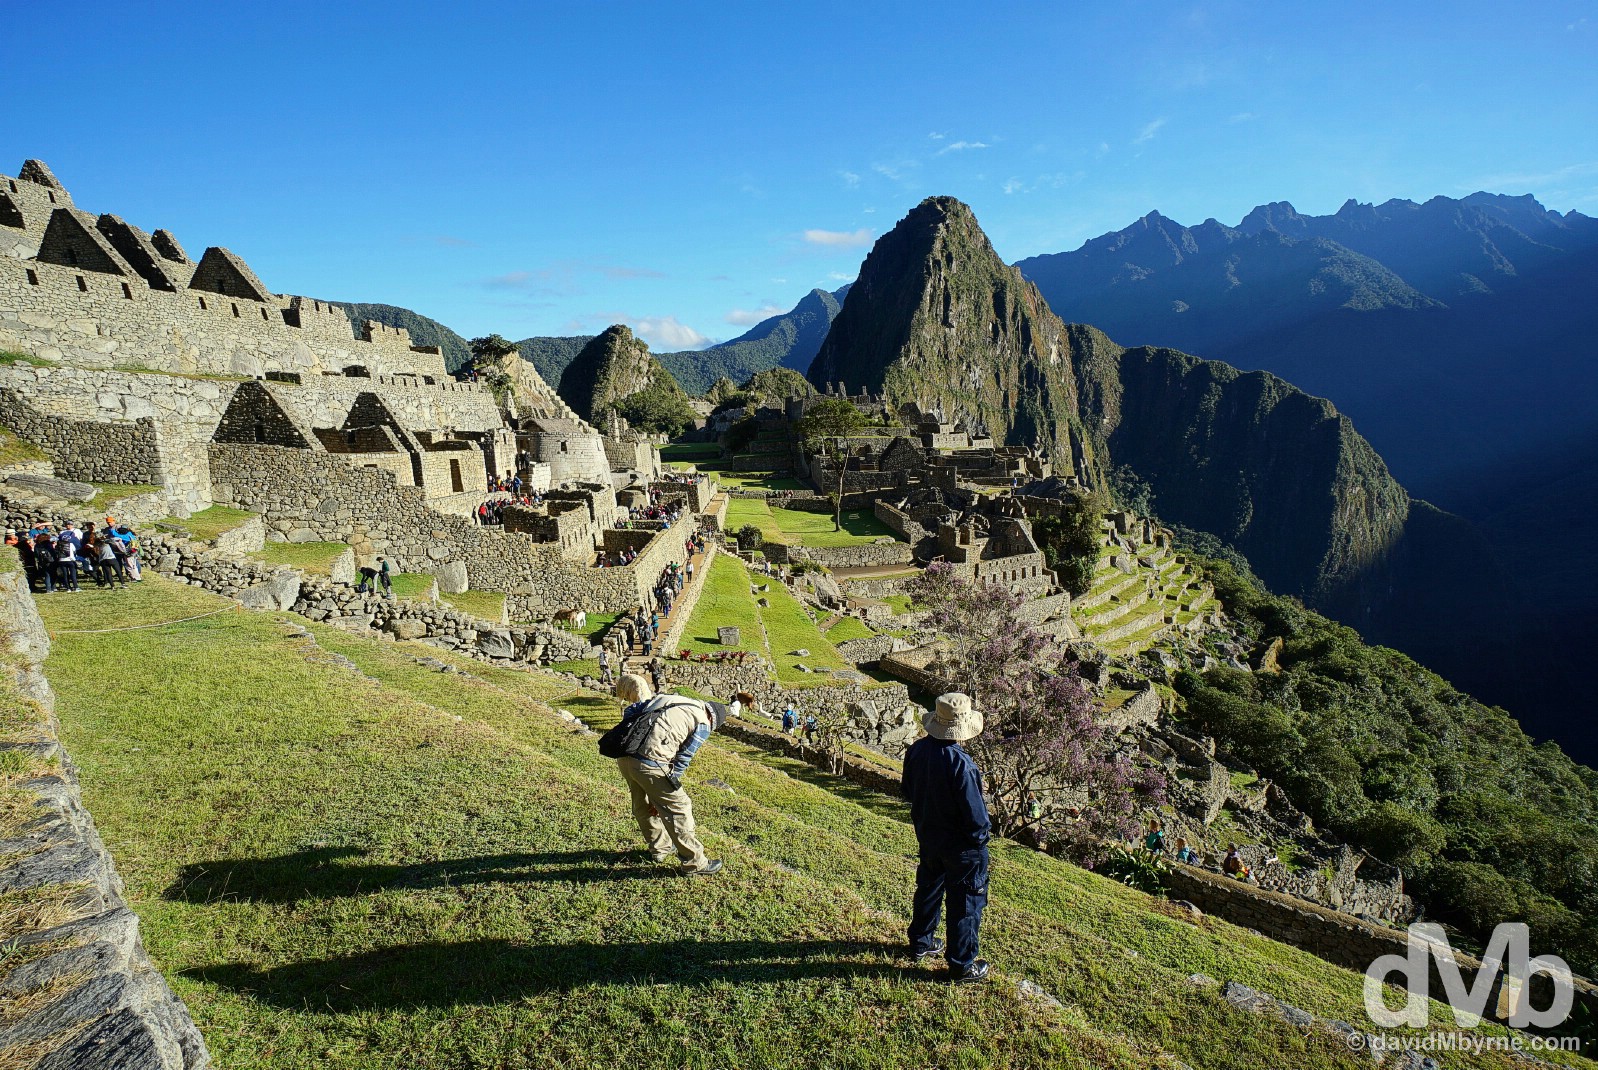 Watching sunrise from the Eastern Agricultural Sector terraces in Machu Picchu, Peru. August 15, 2015. 